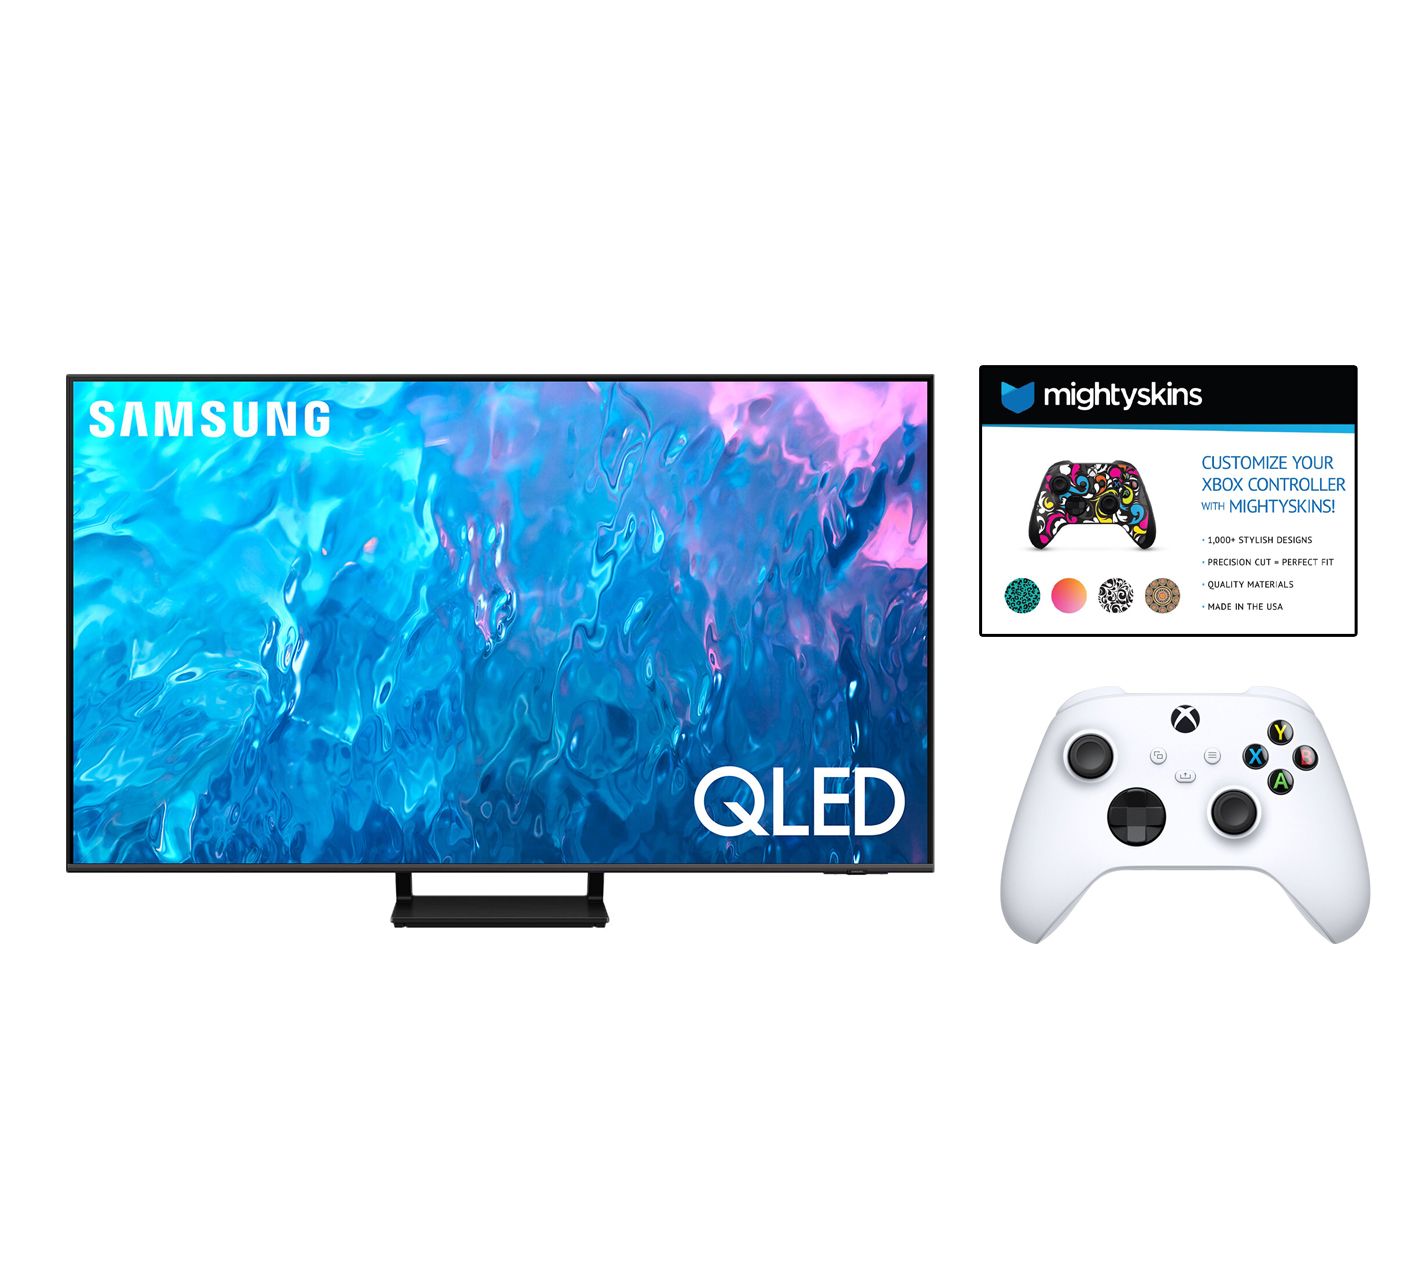 Xbox Gaming on Your Samsung Smart TV - No Console Required 